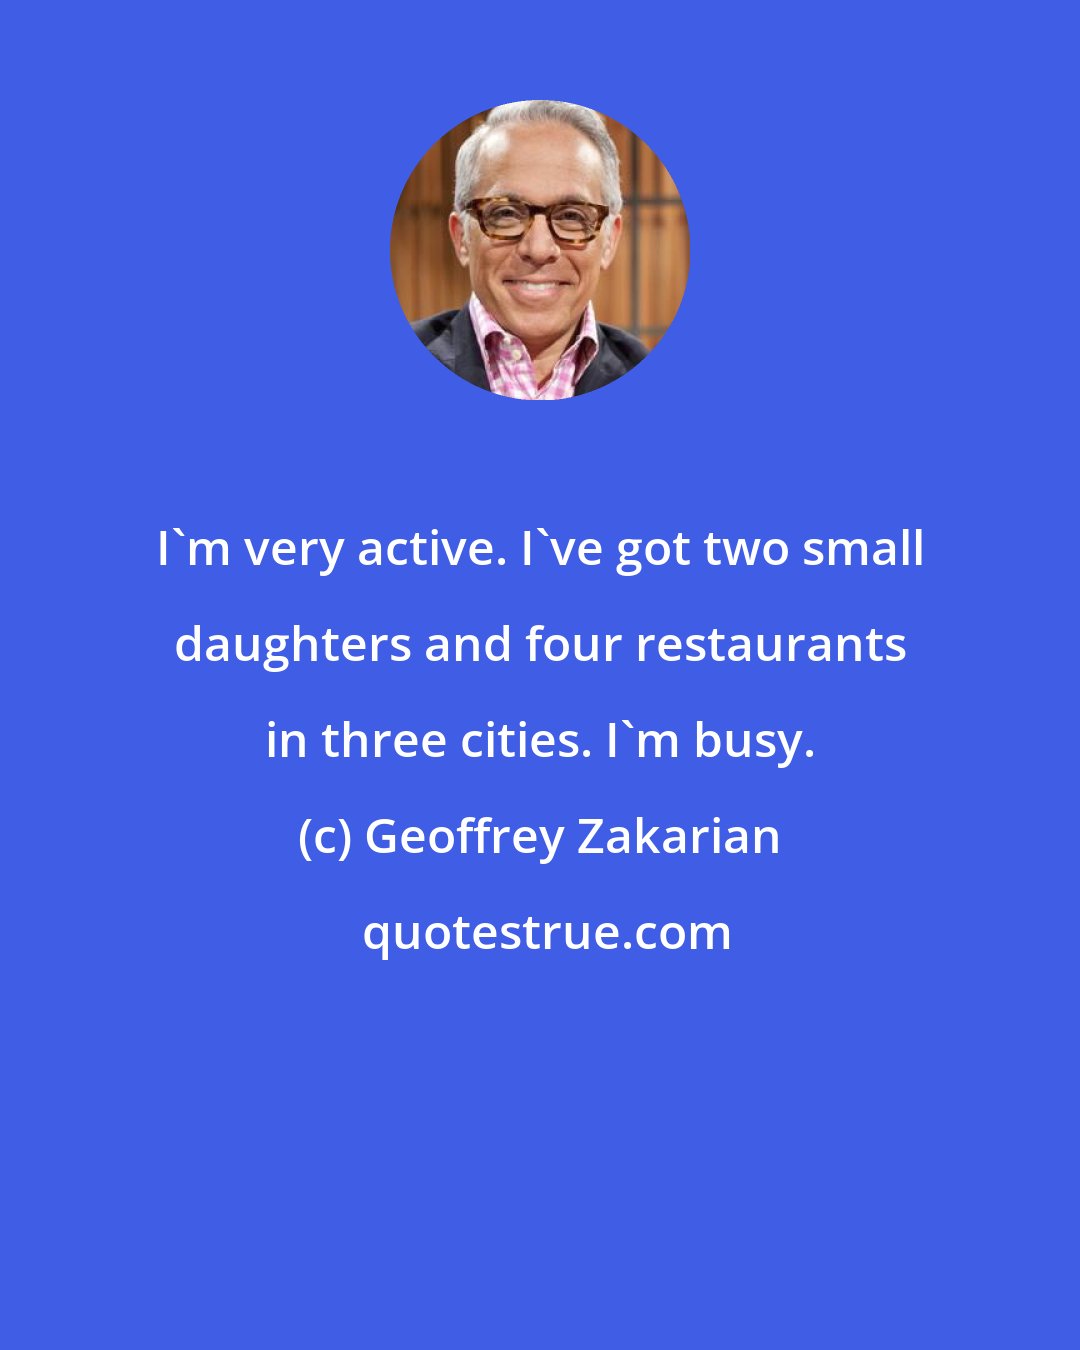 Geoffrey Zakarian: I'm very active. I've got two small daughters and four restaurants in three cities. I'm busy.